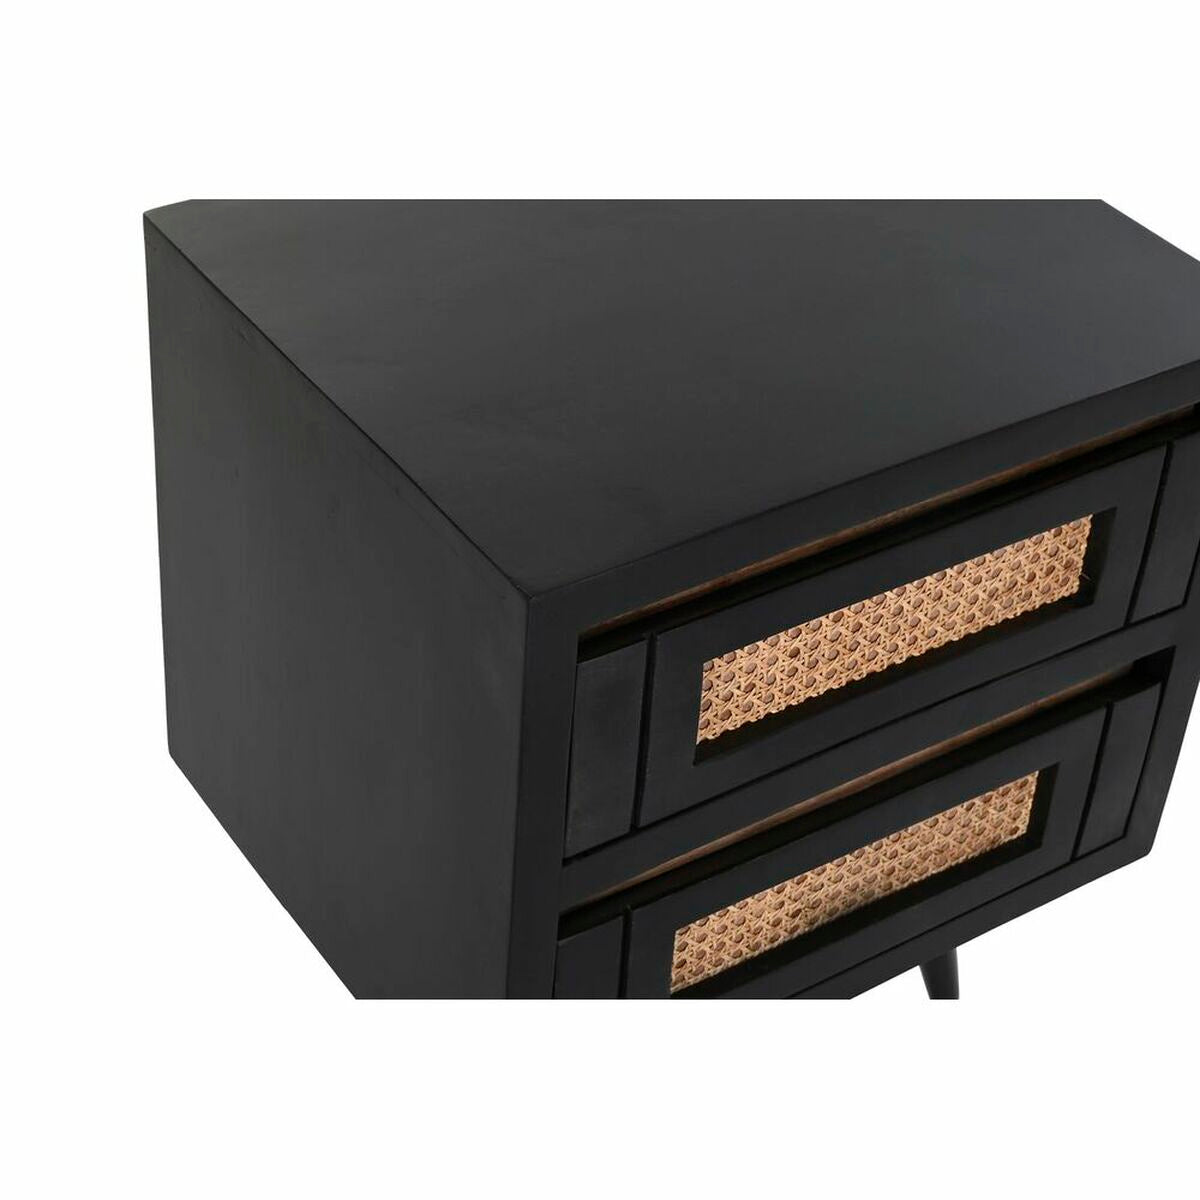 Black Bedside Table in Mango Wood with Rattan (50 x 40 x 55 cm)